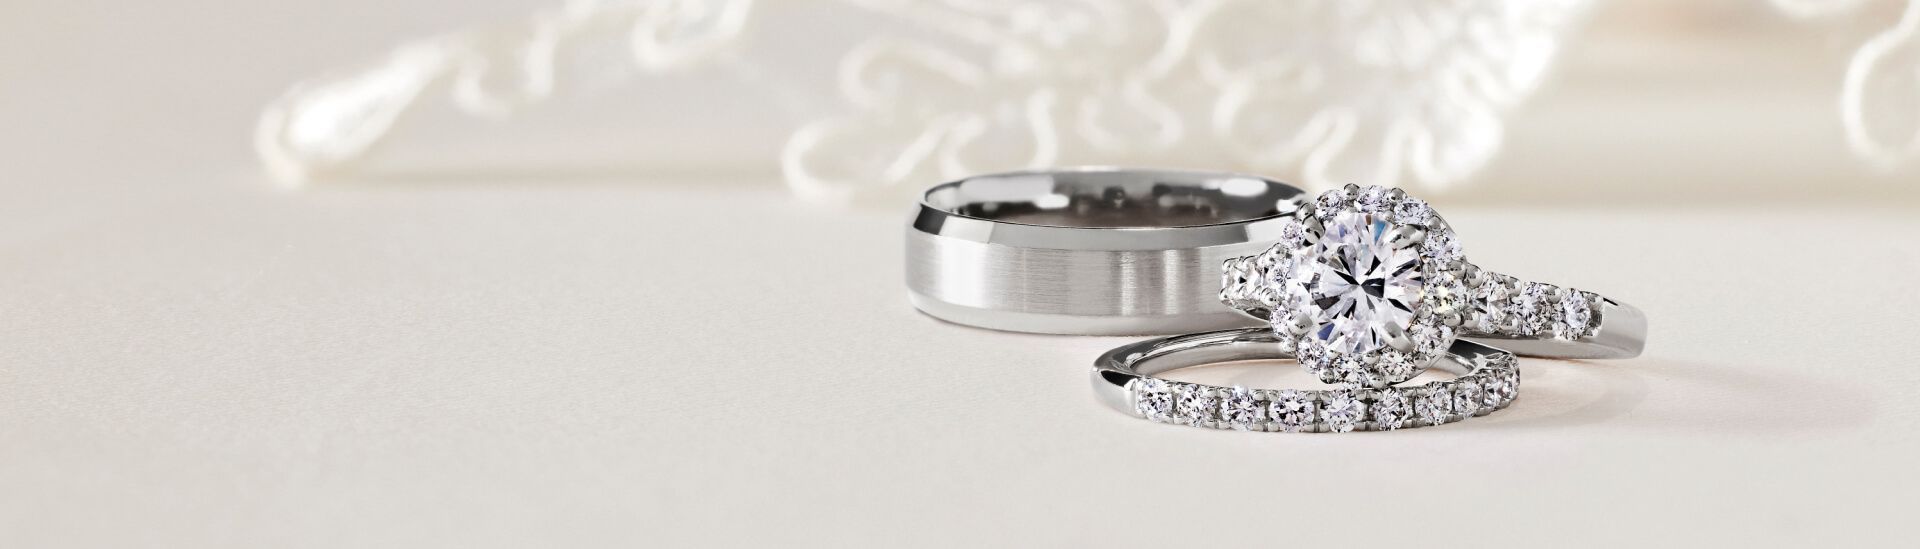 Two diamond rings and a plain metal band on a light background